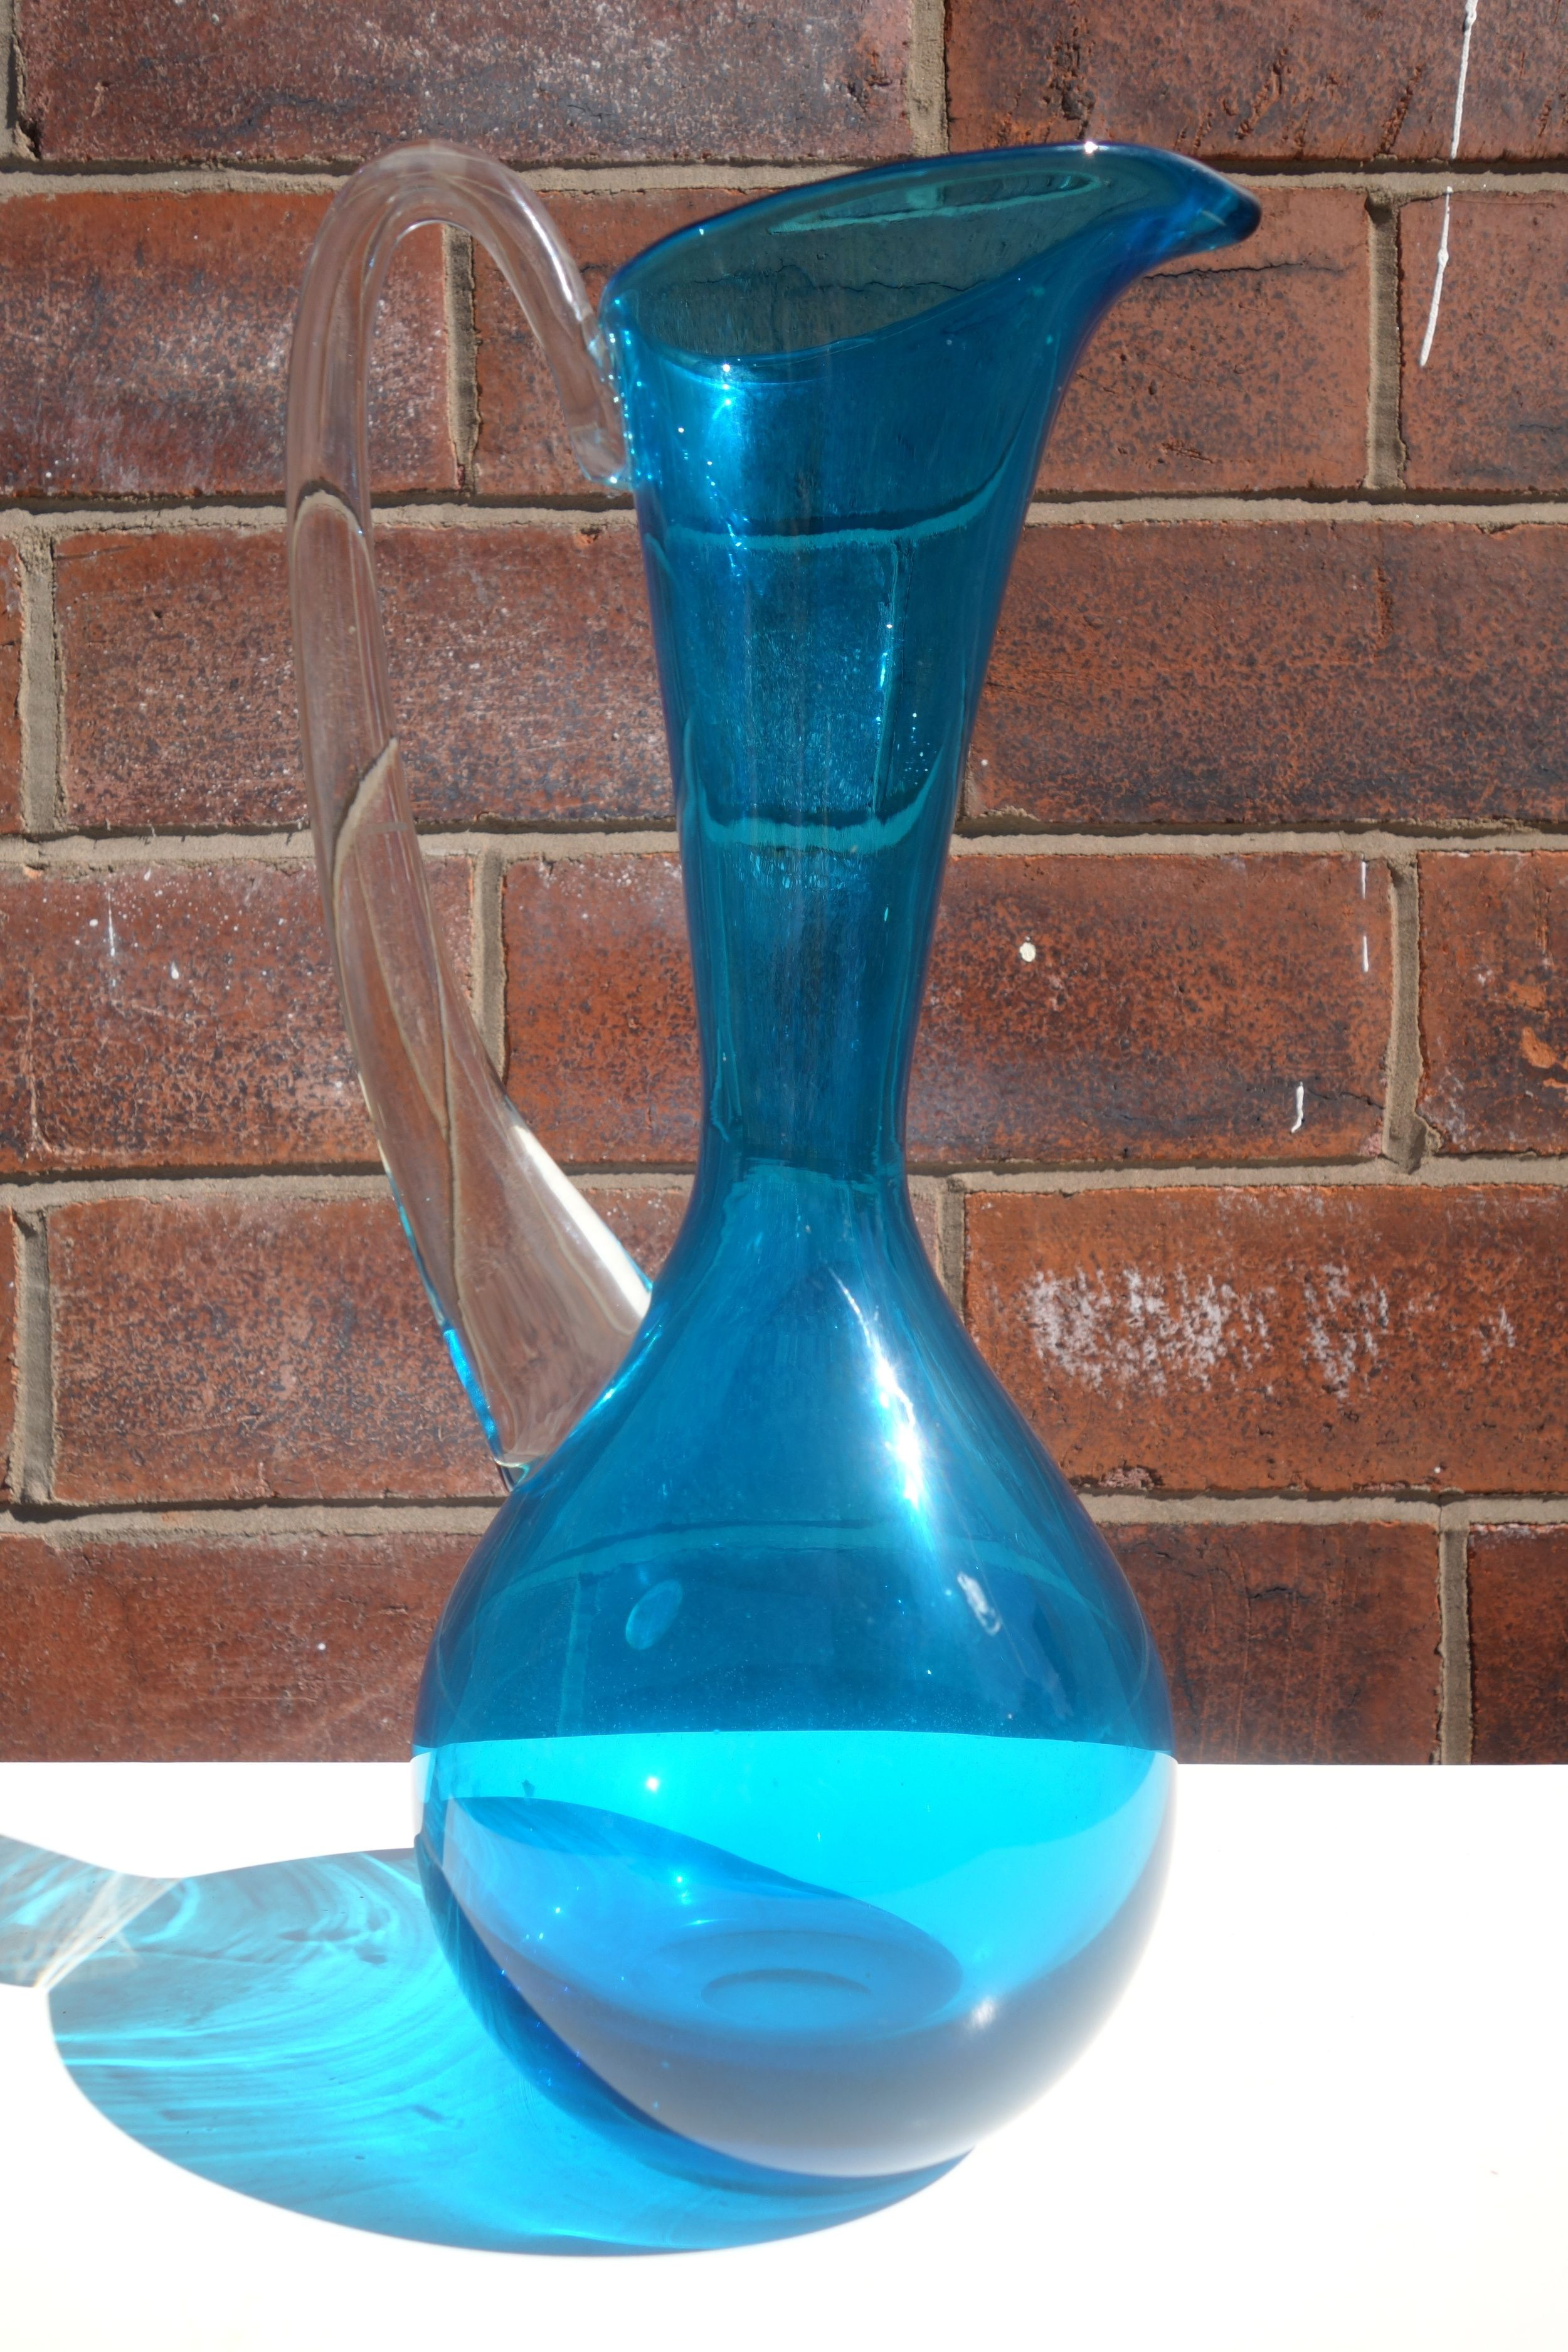 18 Lovely Blue Recycled Glass Vase 2024 free download blue recycled glass vase of antique blue glass vases photos love this blown glass vase glass art within antique blue glass vases photograph retro vintage mid century italian blue glass jug 1